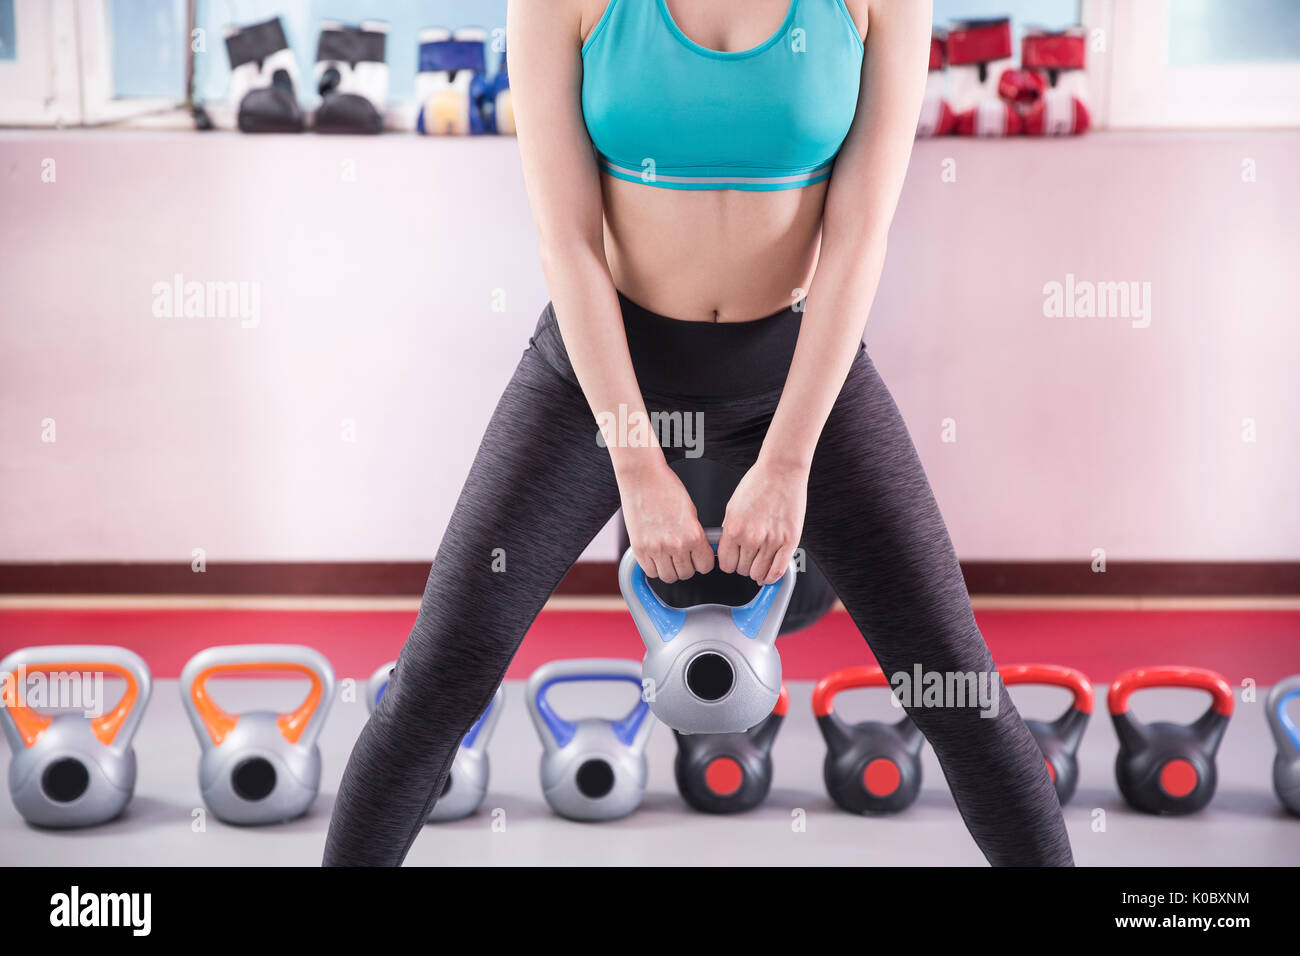 Young woman in sportswear exercising at health club Stock Photo